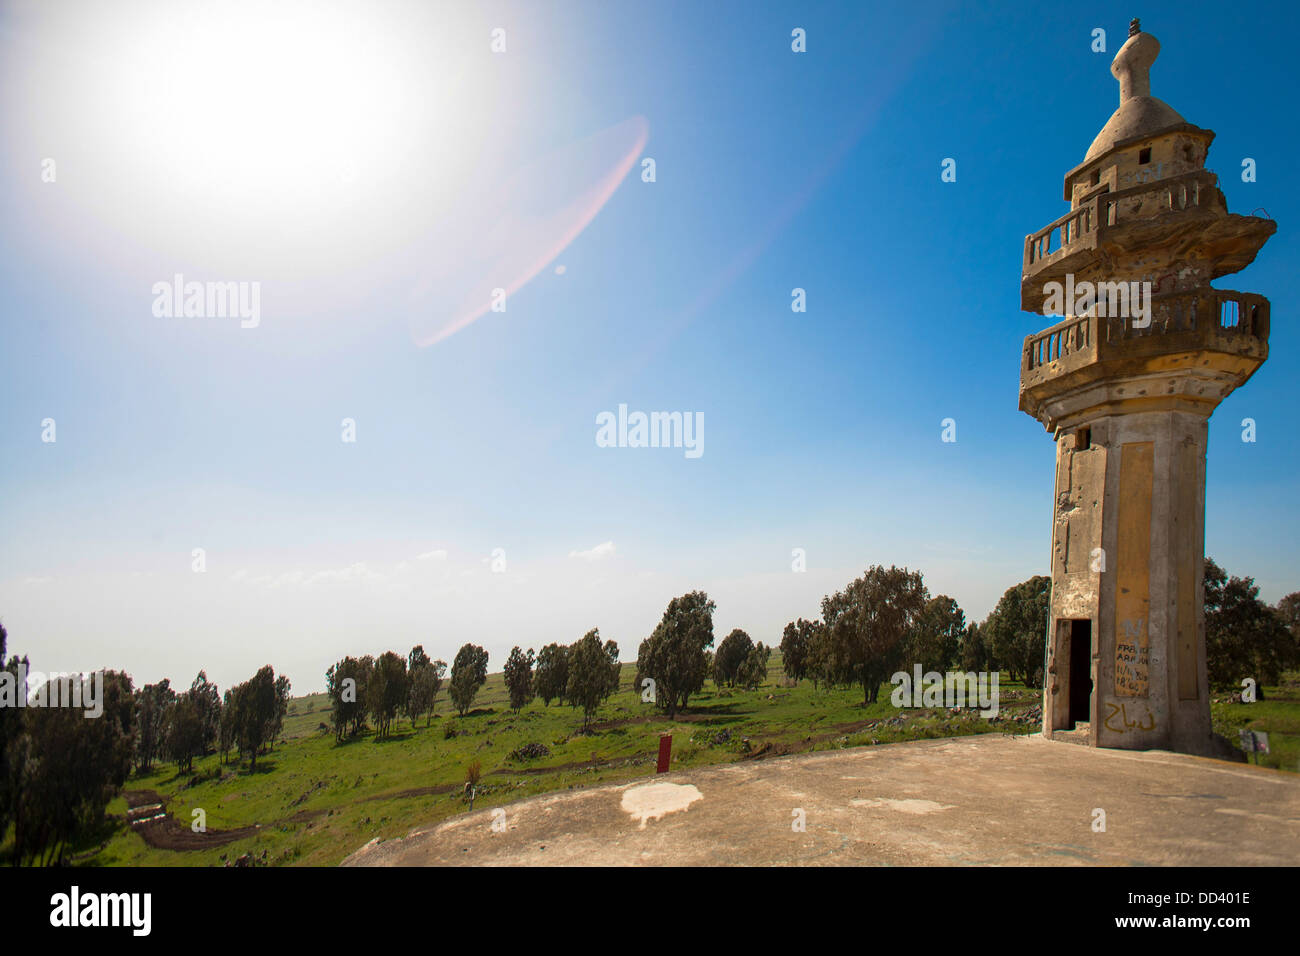 Israel, Golan Heights, Minaret of a Deserted Syrian mosque abandoned during the Six Day War of 1967 Stock Photo